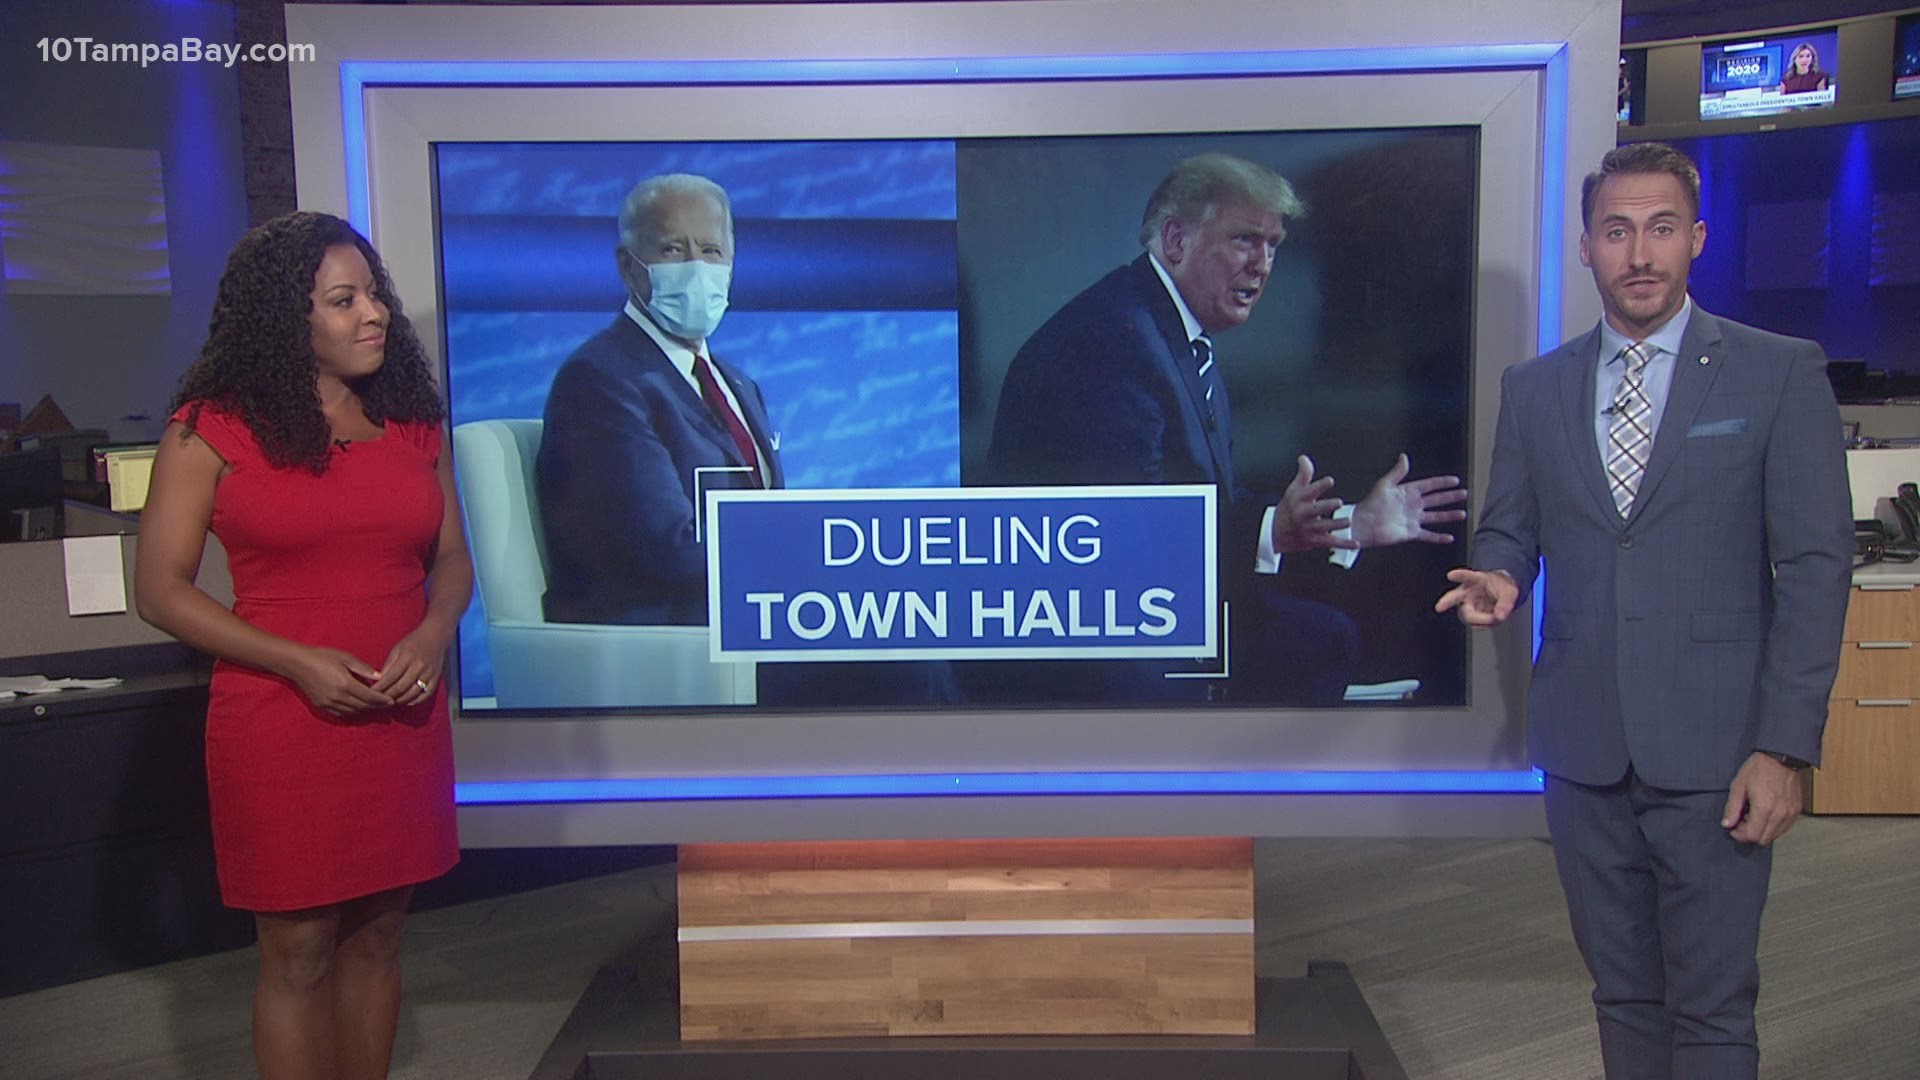 Instead of debating, the presidential rivals took questions in different cities on different networks: Trump from Miami and Biden from Philadelphia.